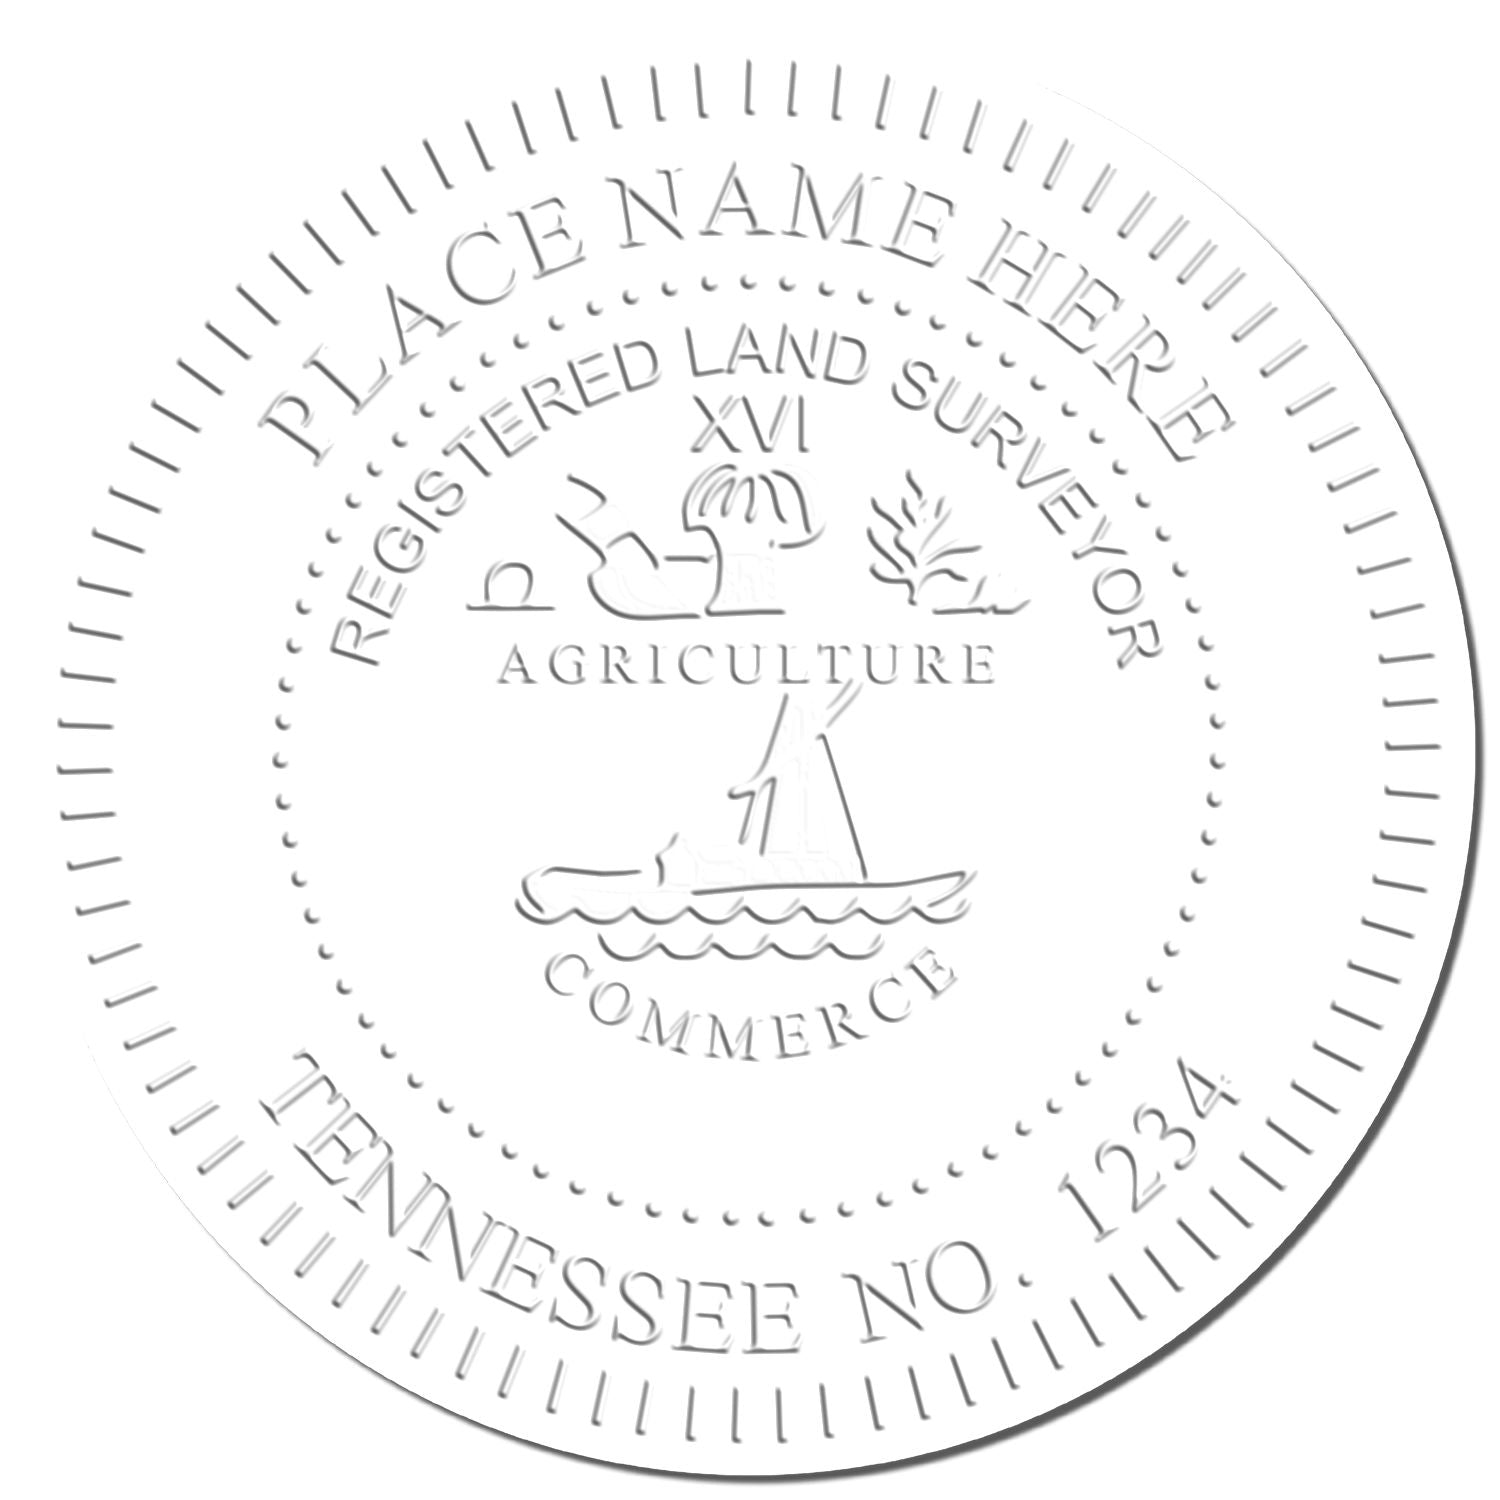 This paper is stamped with a sample imprint of the Heavy Duty Cast Iron Tennessee Land Surveyor Seal Embosser, signifying its quality and reliability.